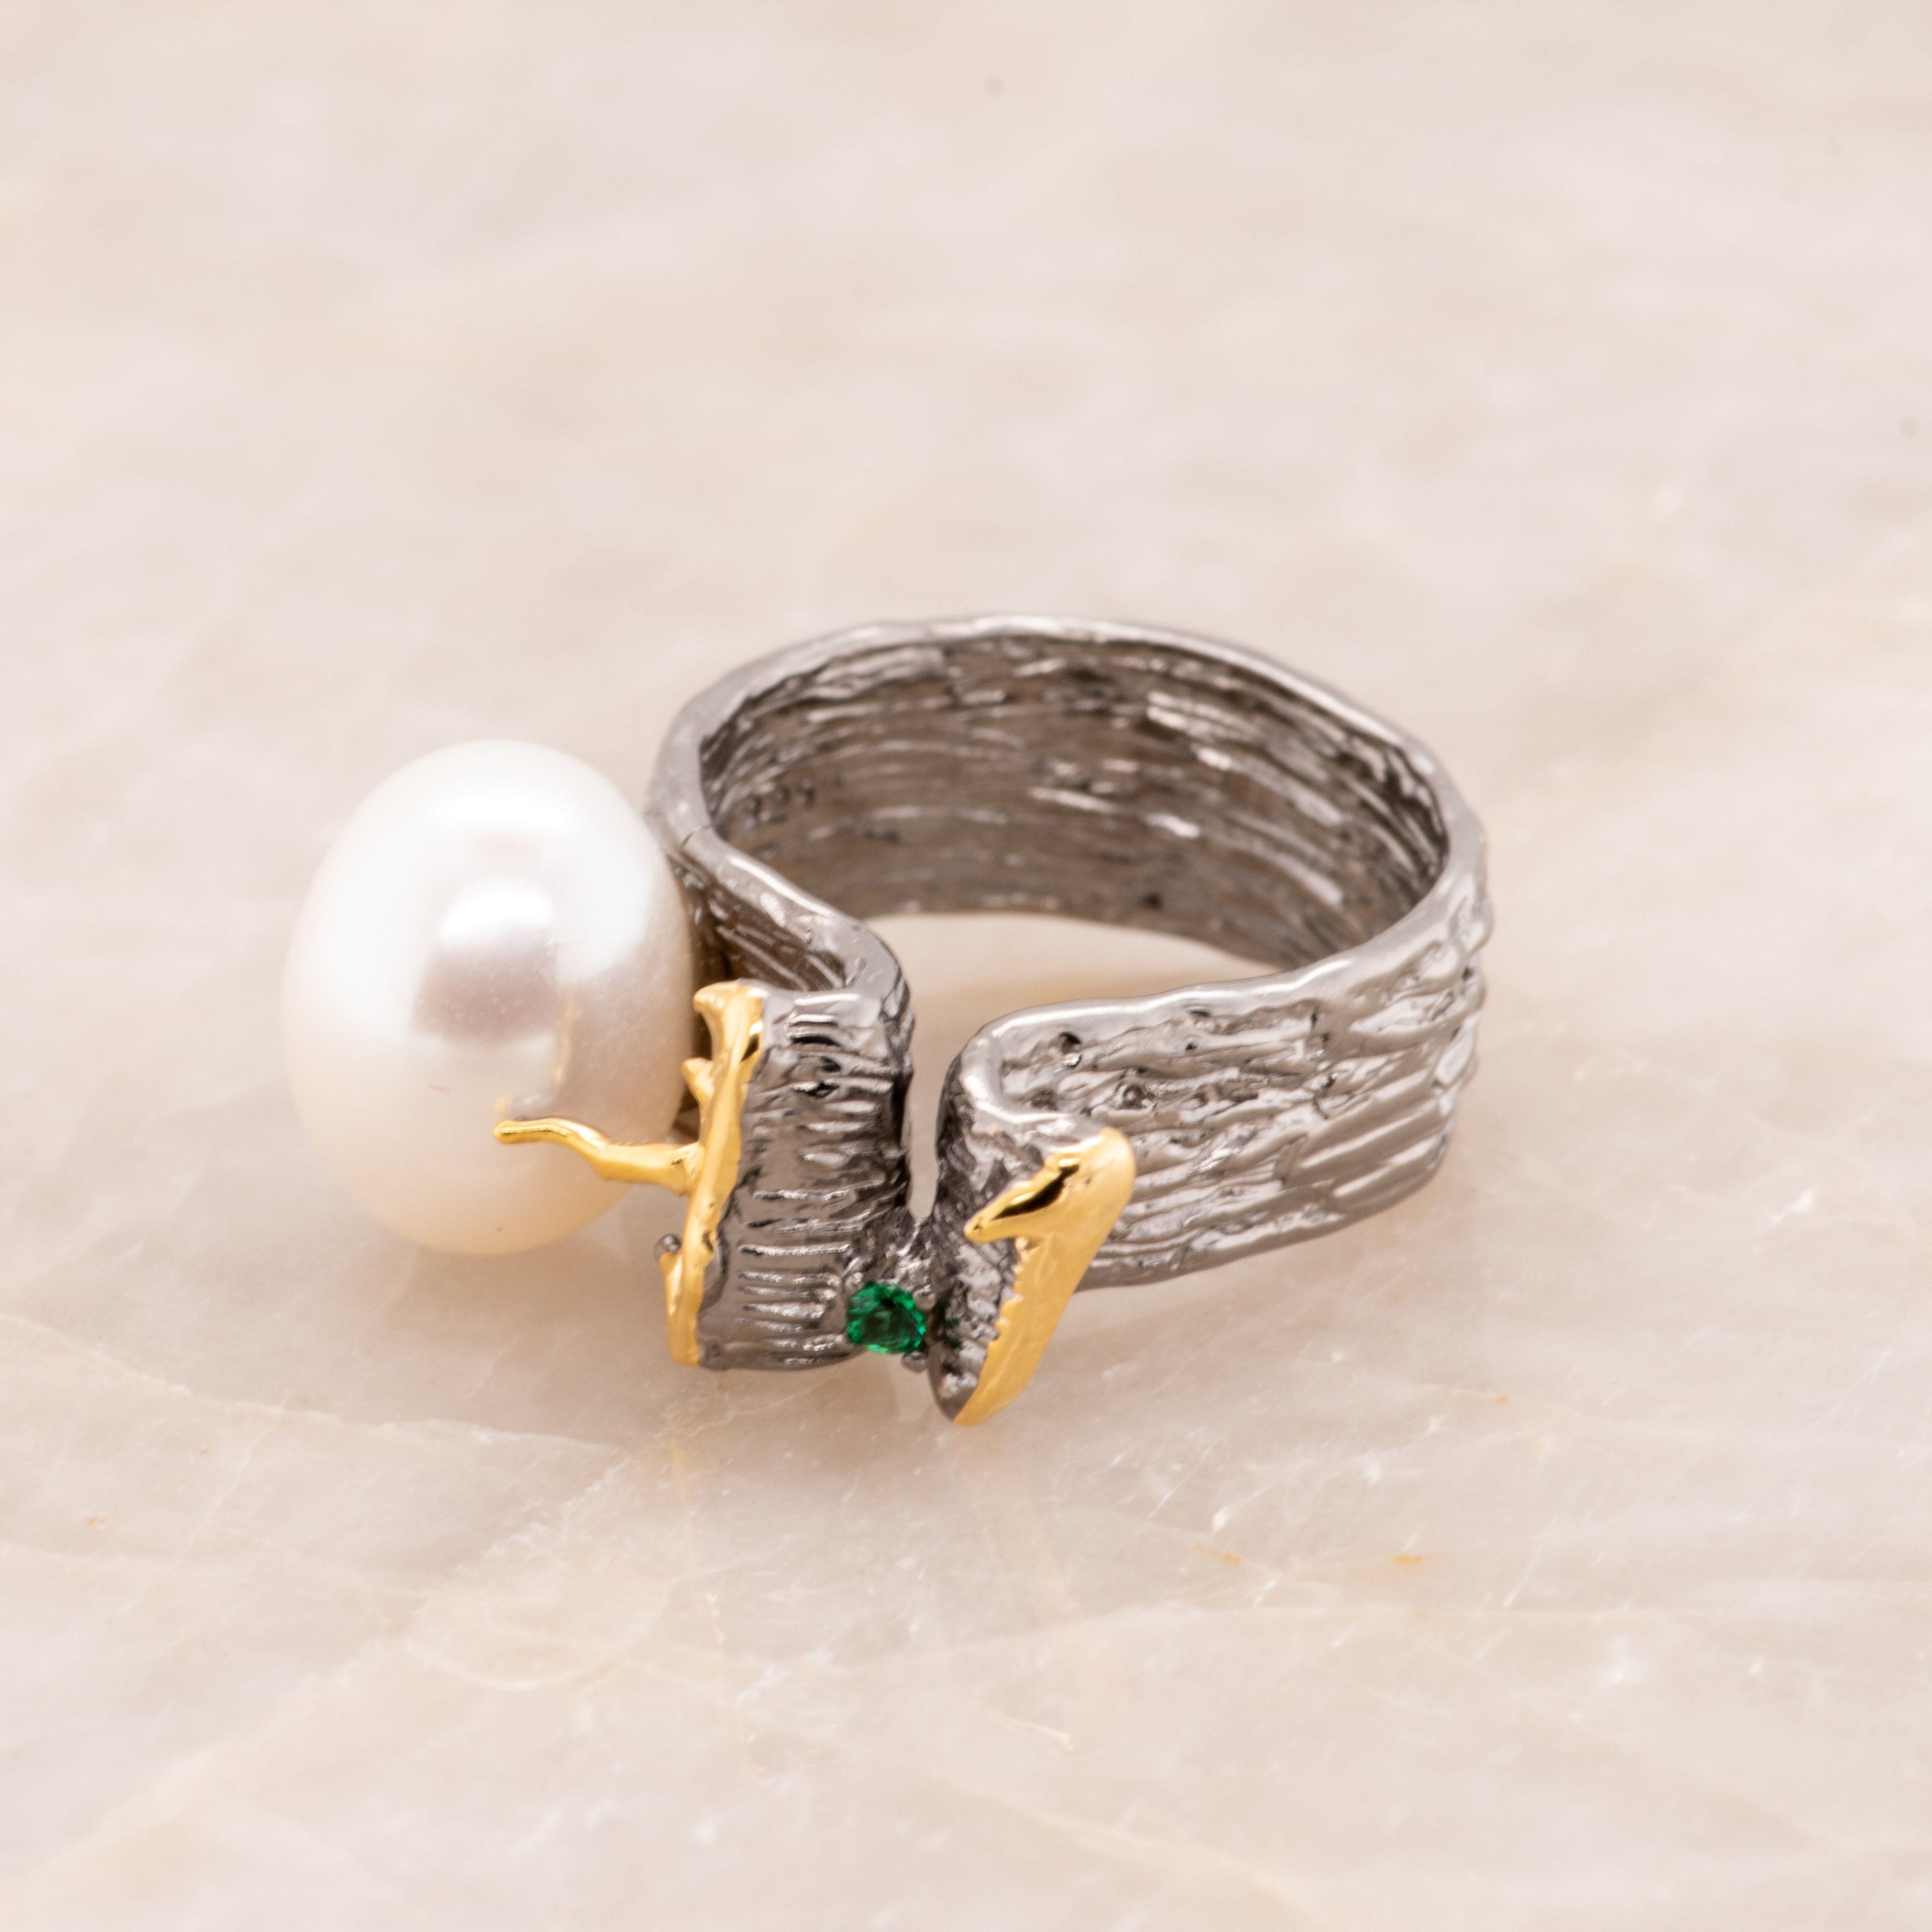 Irta Green Spinel Baroque Pearl Ring in Sterling Silver